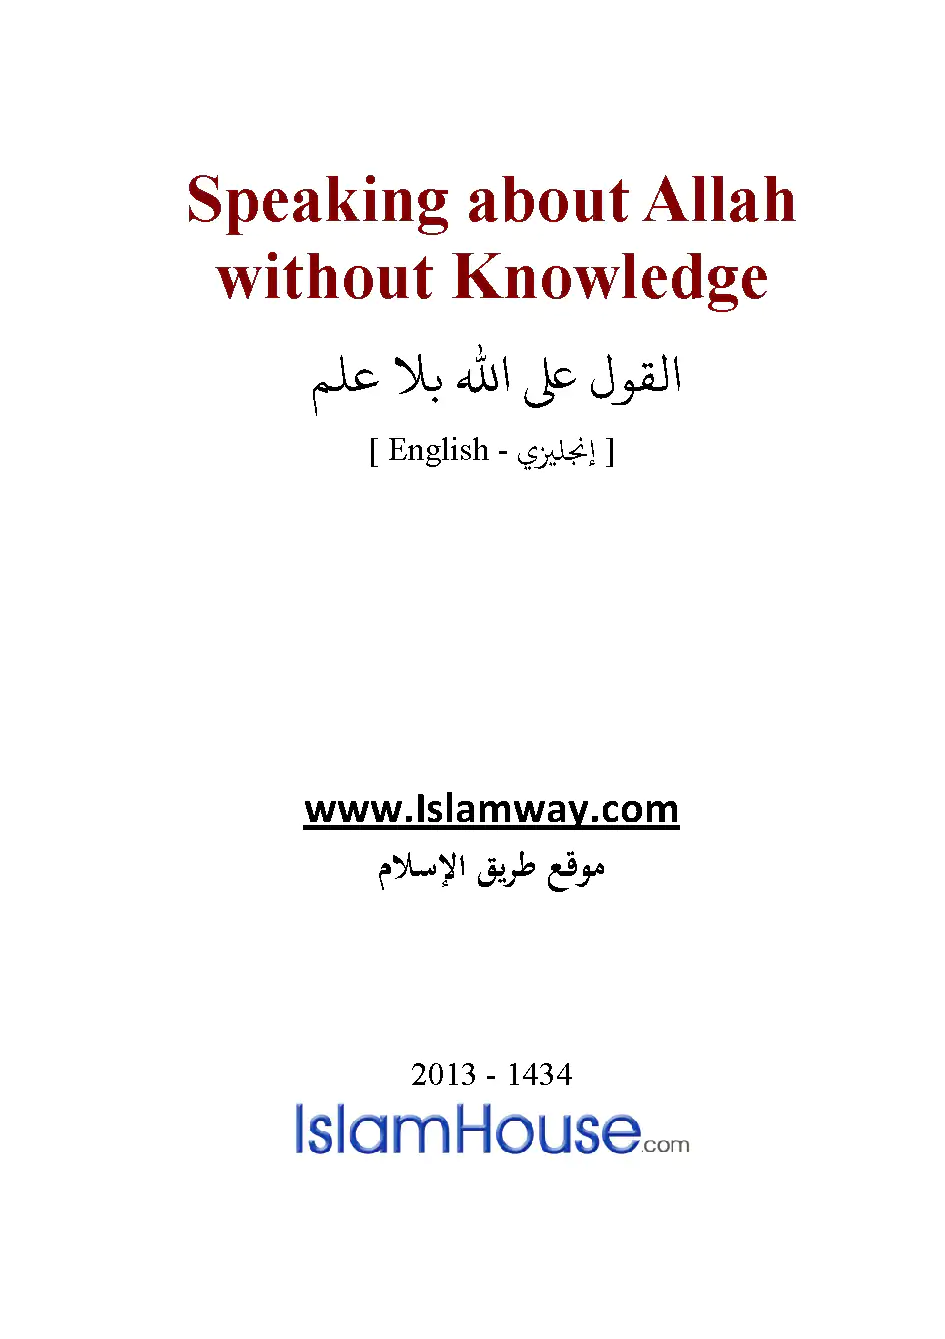 Speaking about Allah without Knowledge